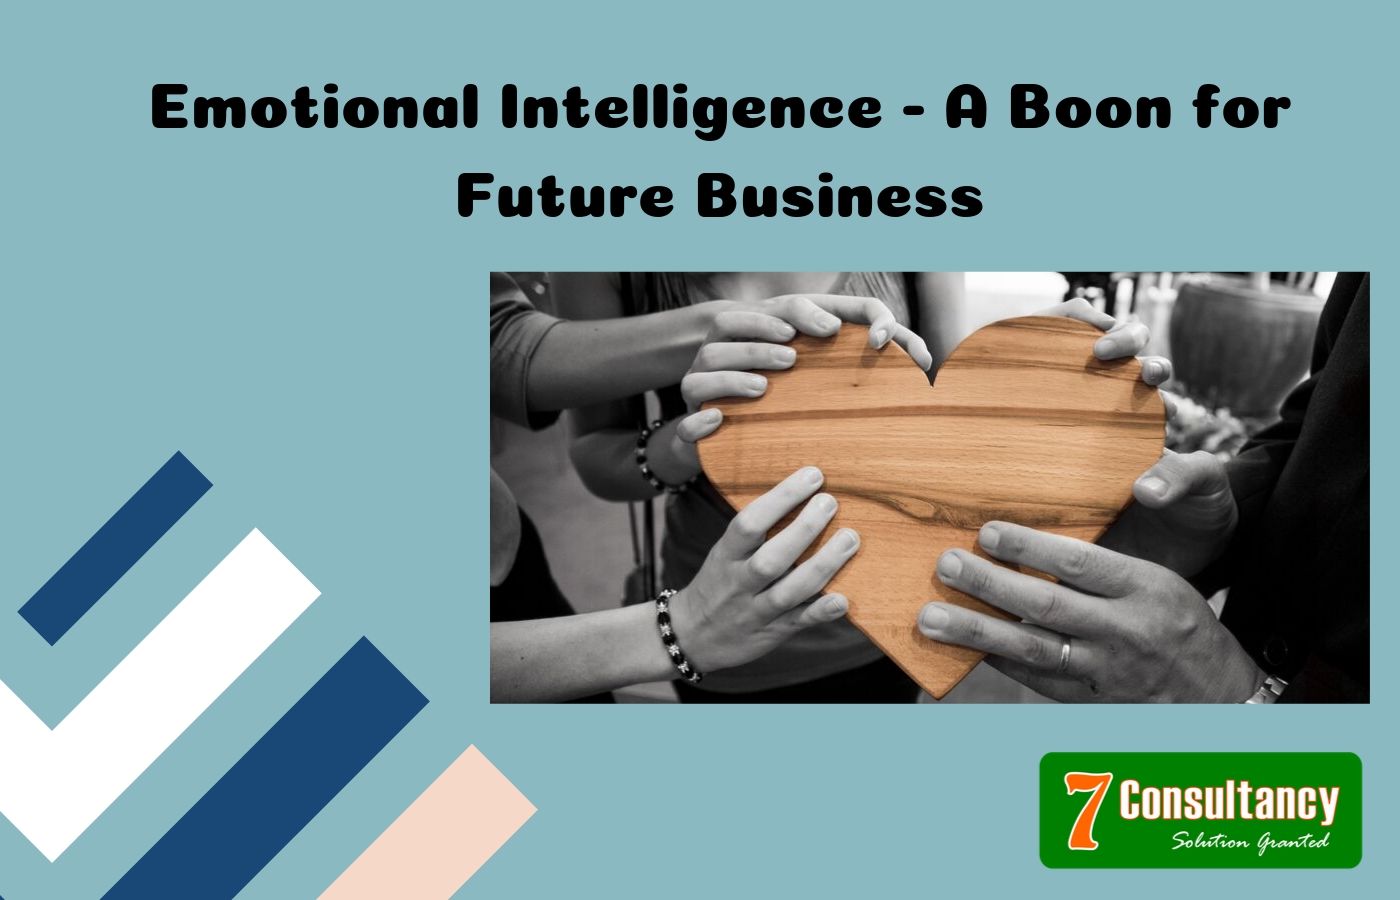 Emotional Intelligence - A Boon for Future Business